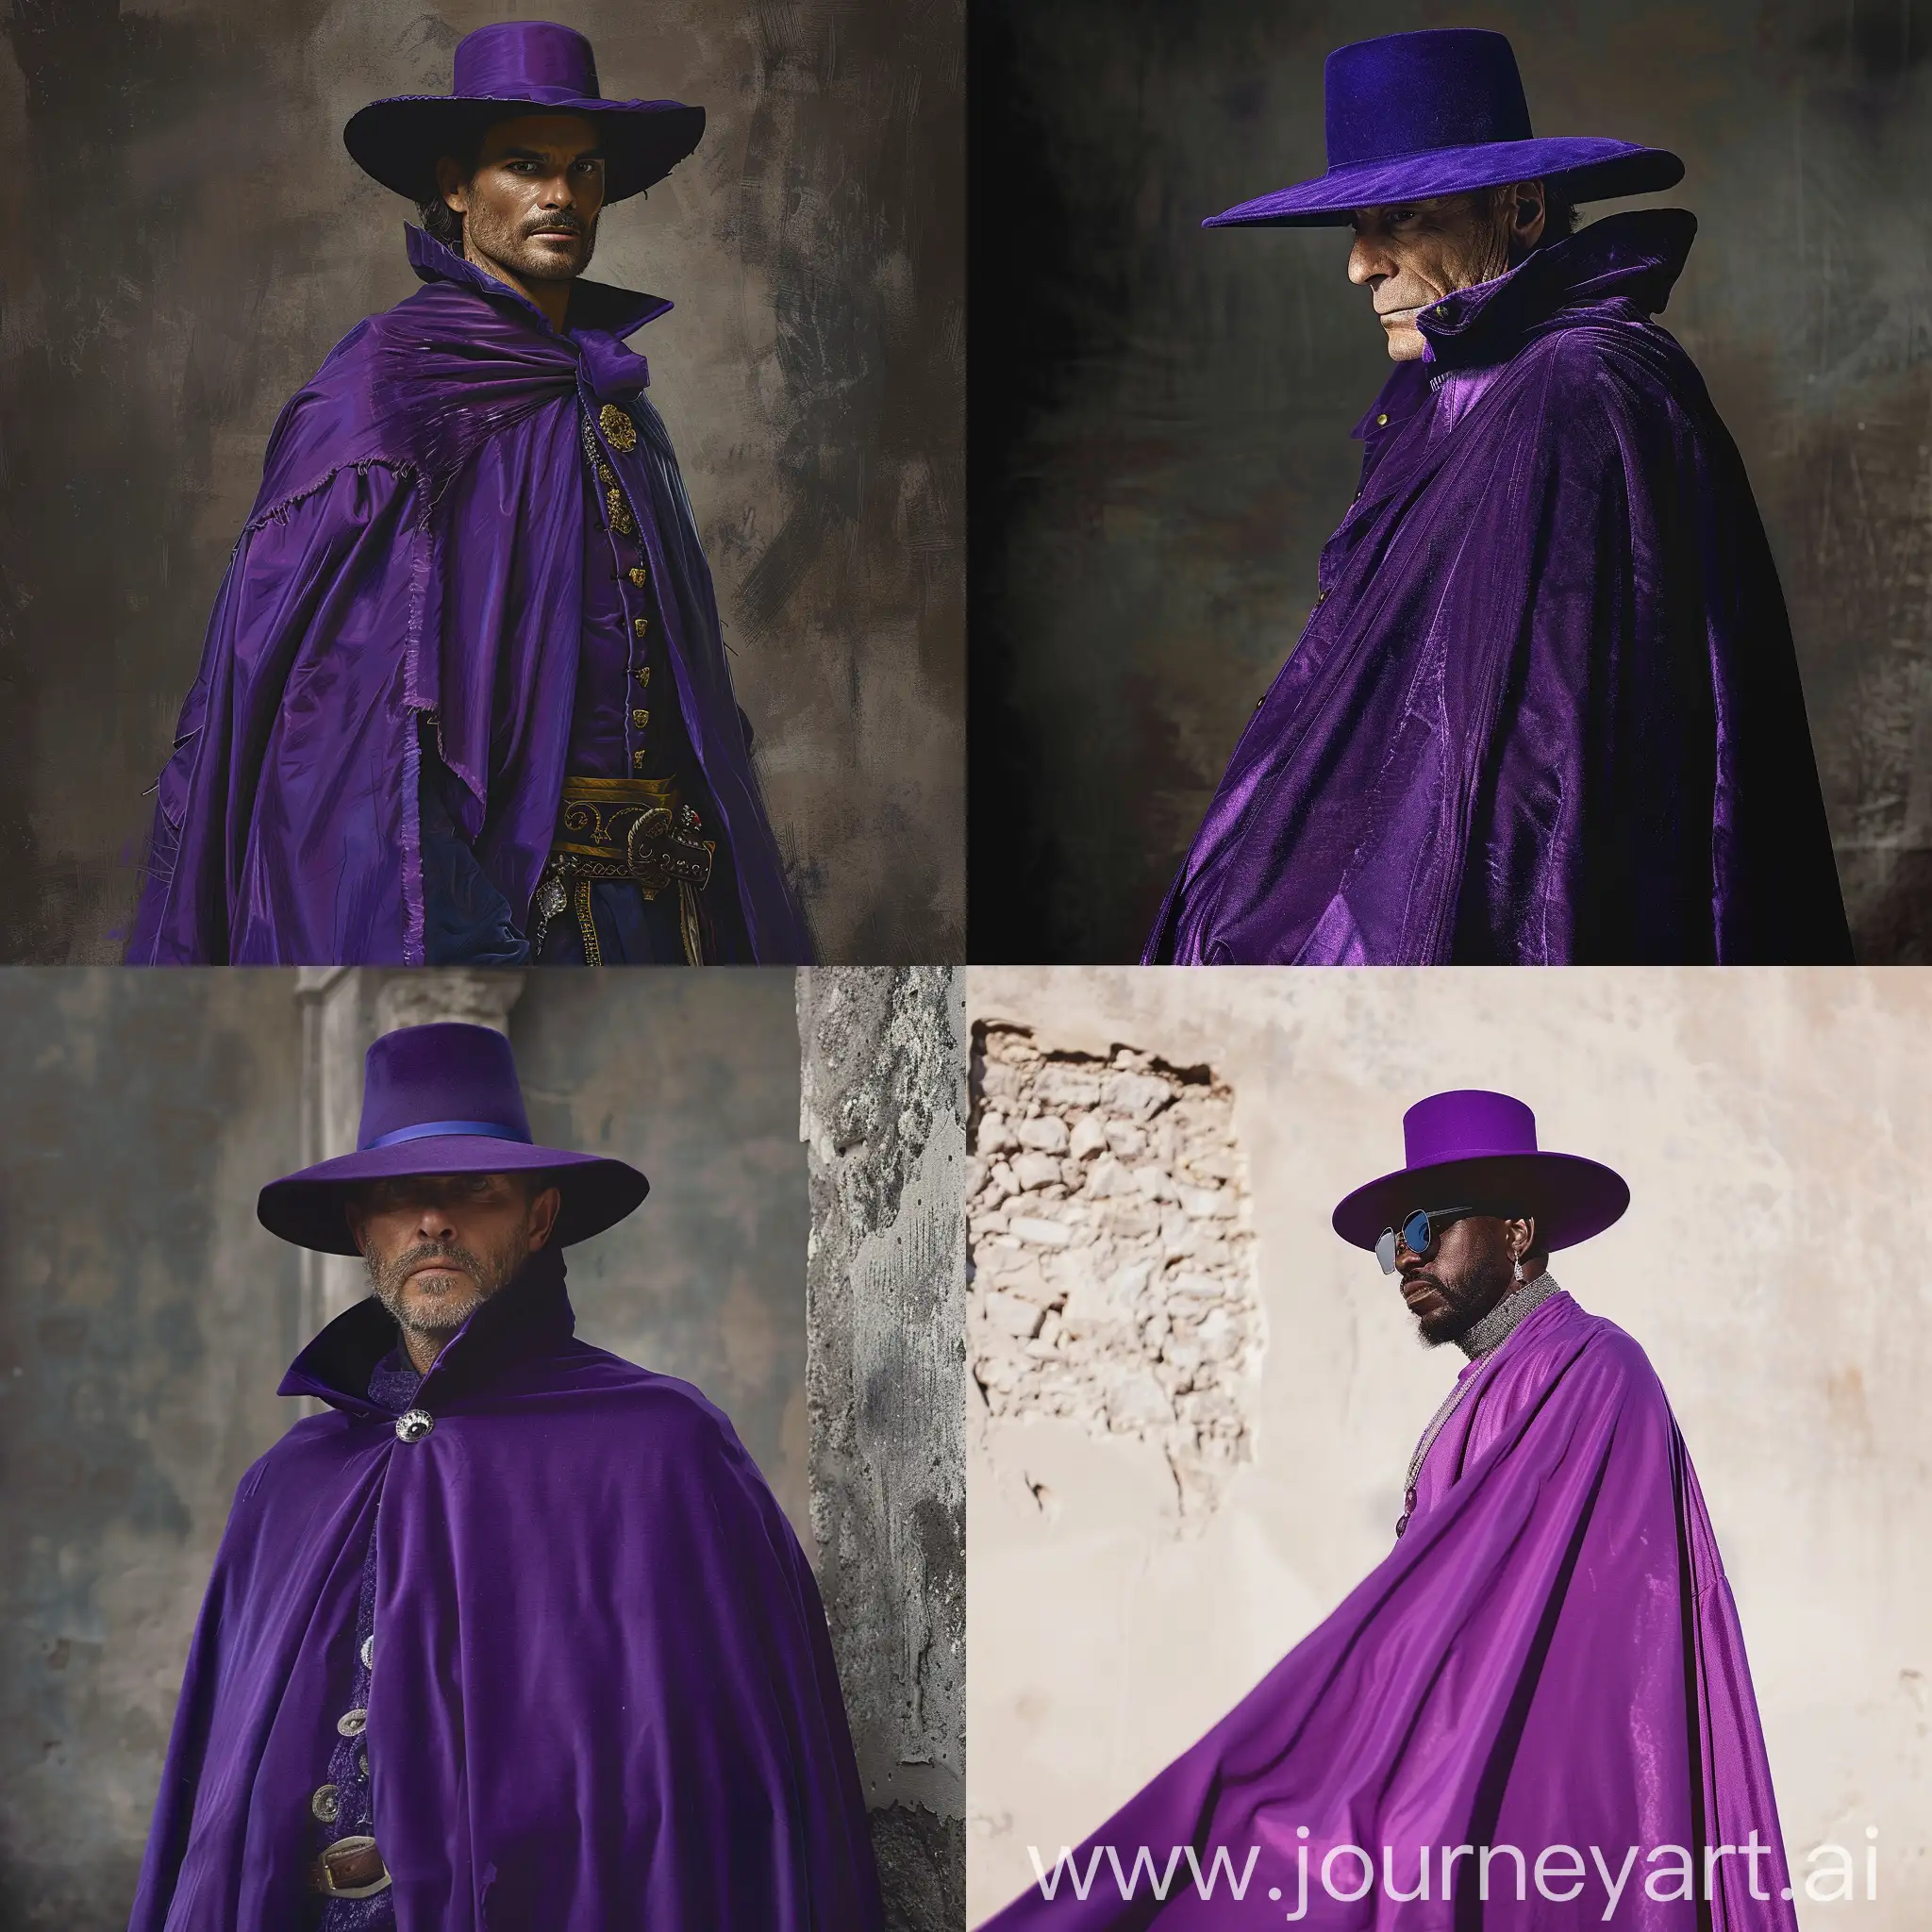 Mysterious-Man-in-Purple-Cloak-and-Hat